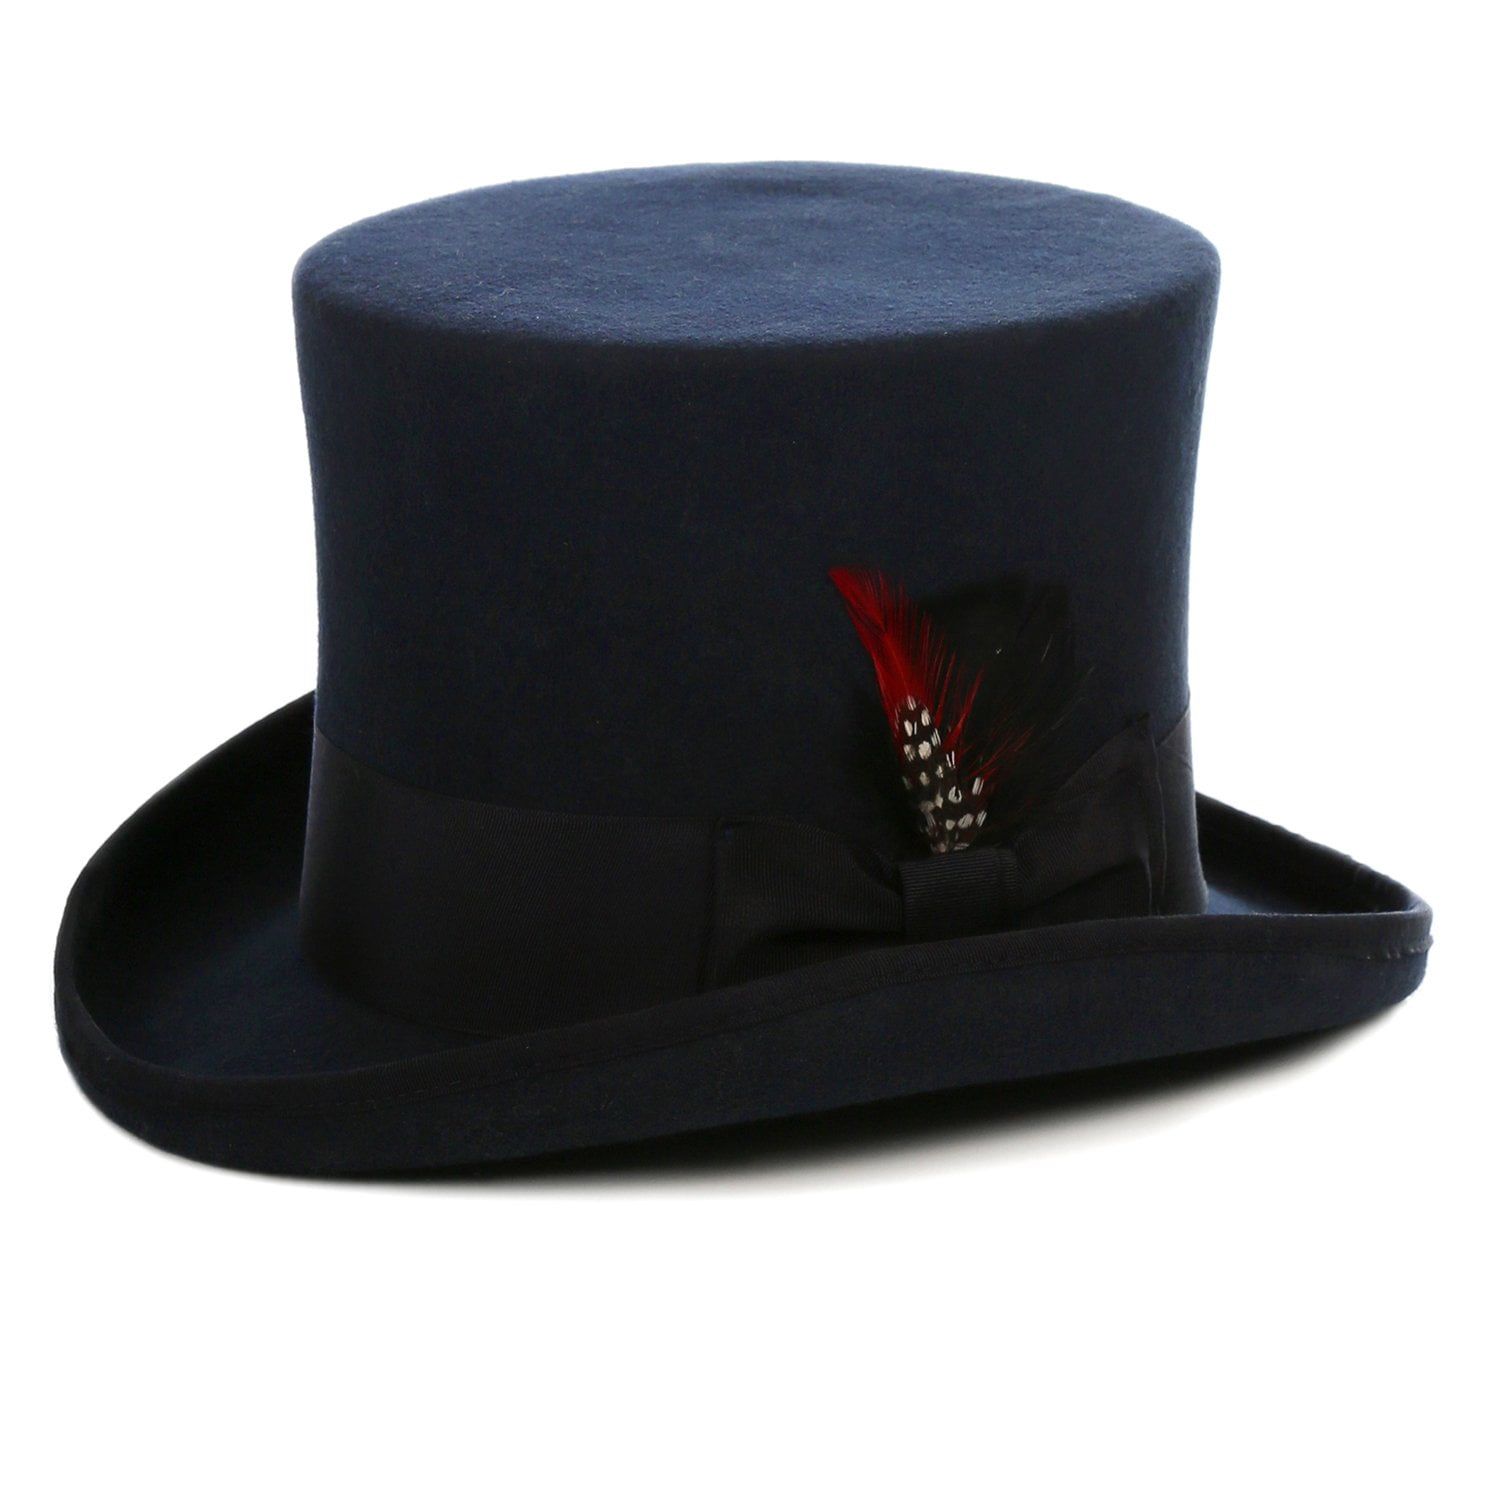 Boxed HAND MADE TOP HAT 100% WOOL Felt Satin Wedding Party Event